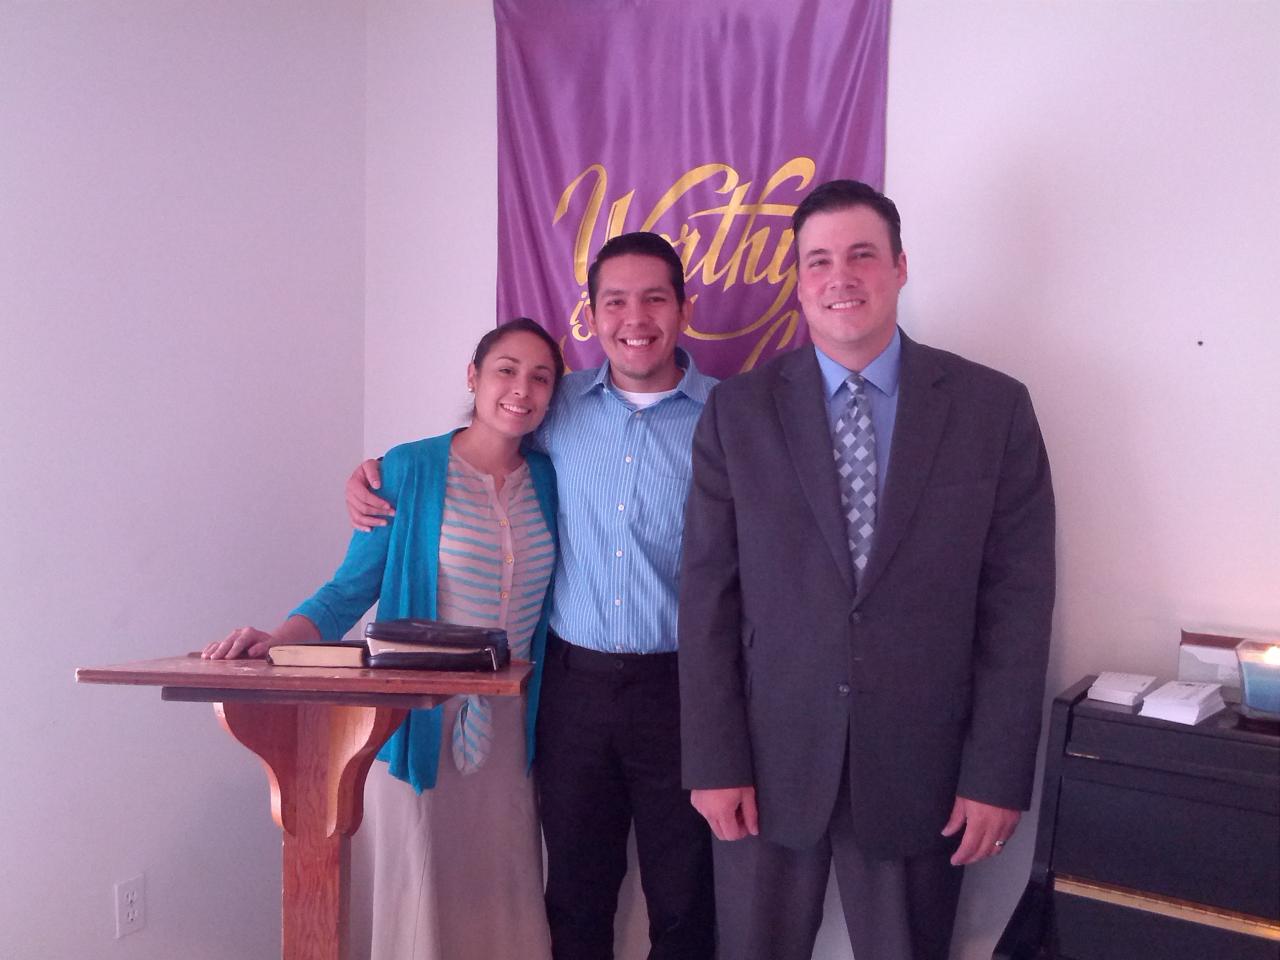 Pastor with a young married couple